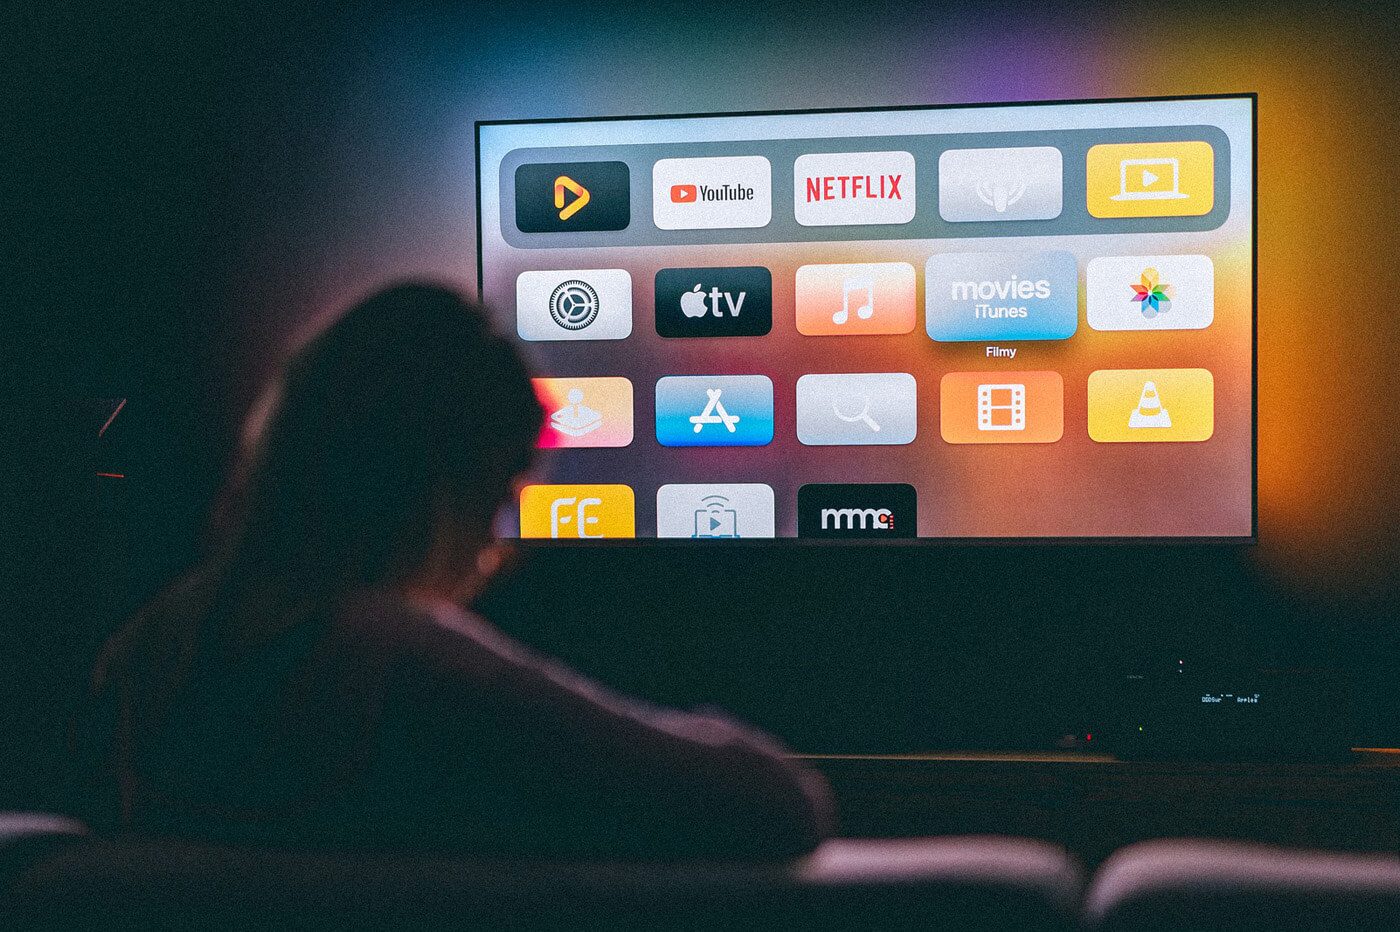 A person sits in a dimly lit room, facing a large screen displaying various app icons including YouTube, Netflix, Apple TV, and others. The room has a dark ambiance, and the screen glows brightly with vibrant colors from the app icons.